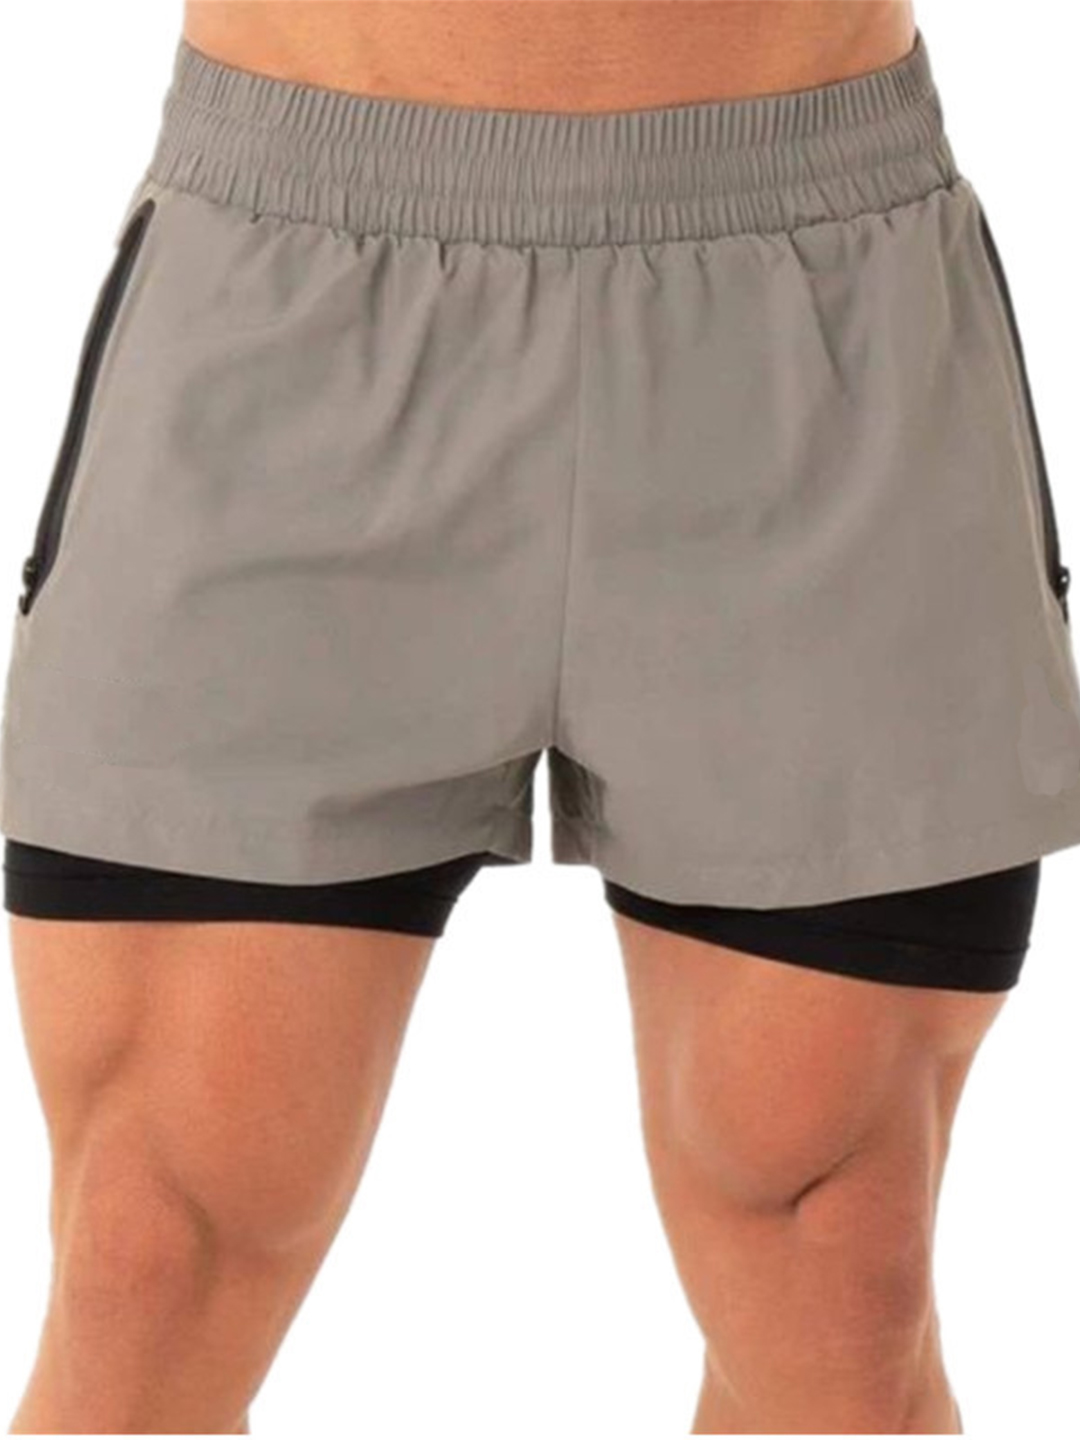 Men's Double Quick Drying Gym Shorts